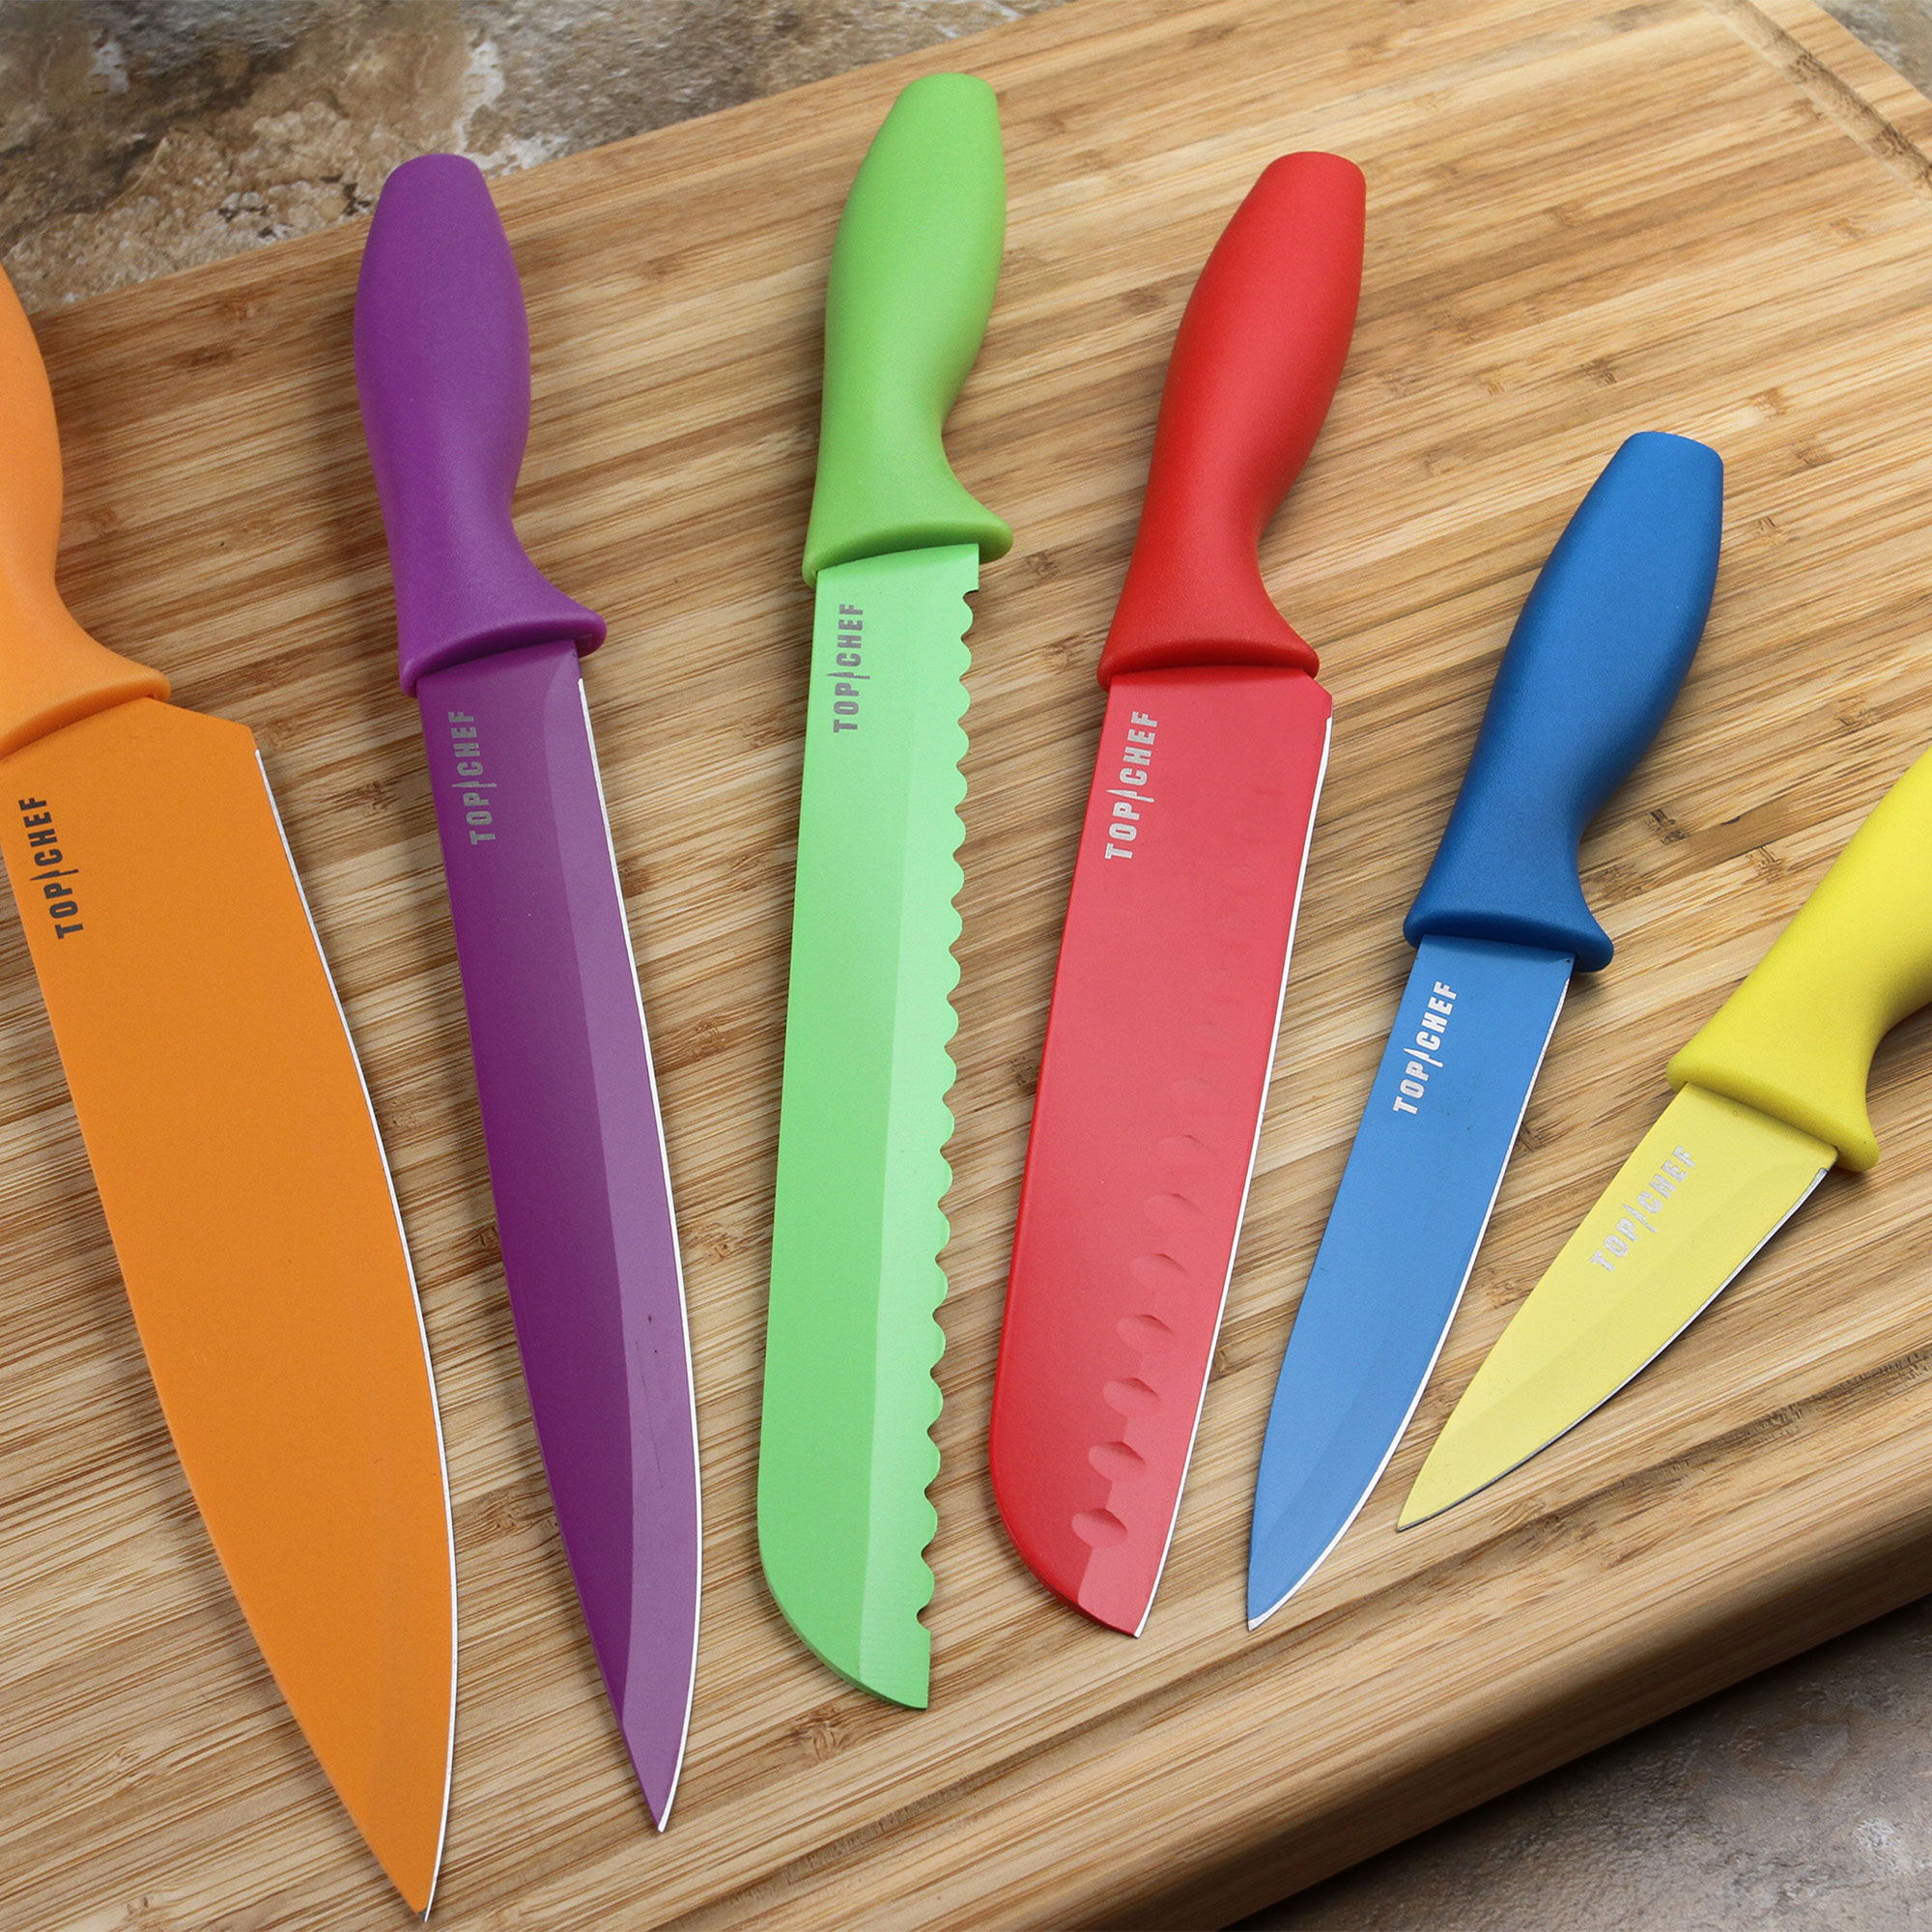 Top Chef 6-Piece Colored Knife Set, Professional Grade - image 3 of 4